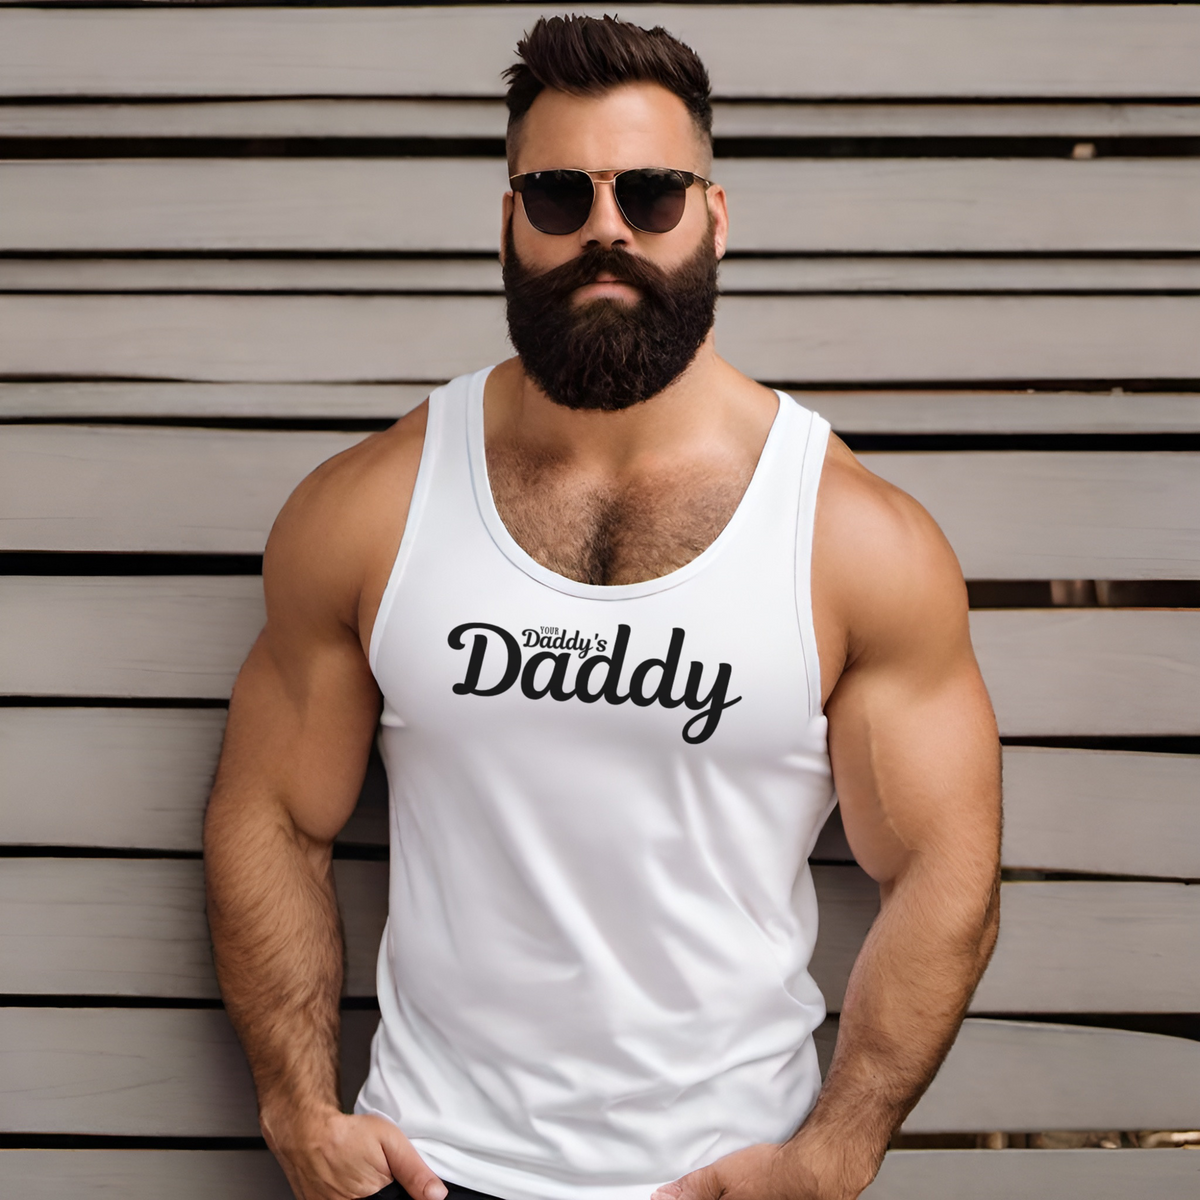 Your Daddy's Daddy Tank